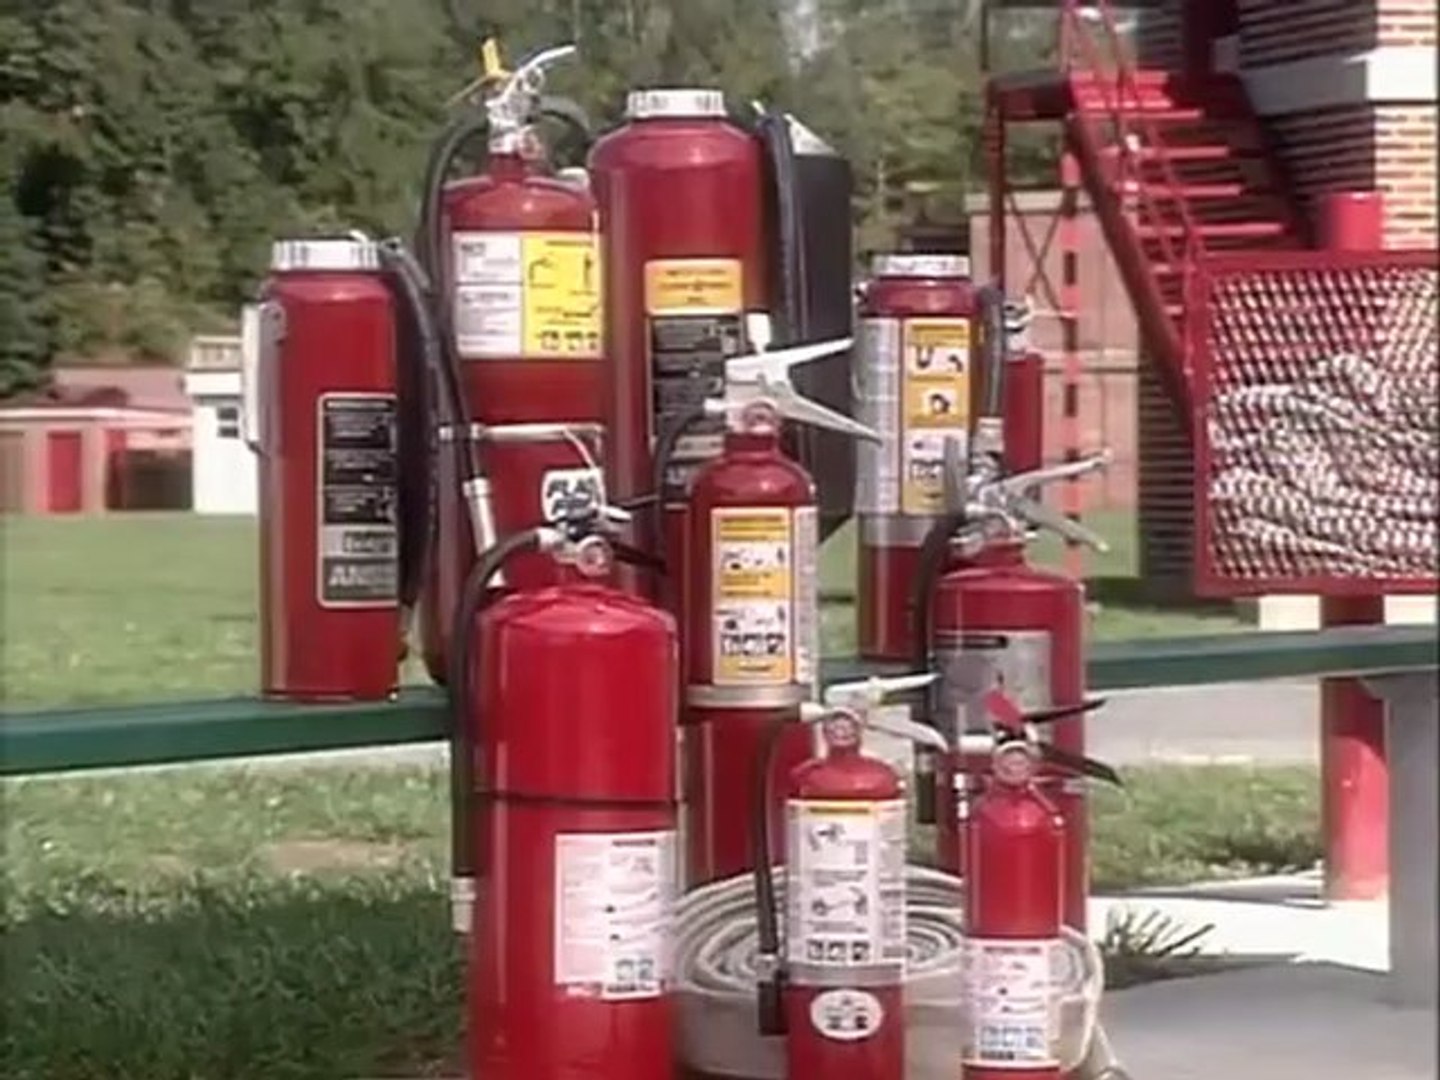 Nfpa Fire Extinguisher Training Video Video Dailymotion